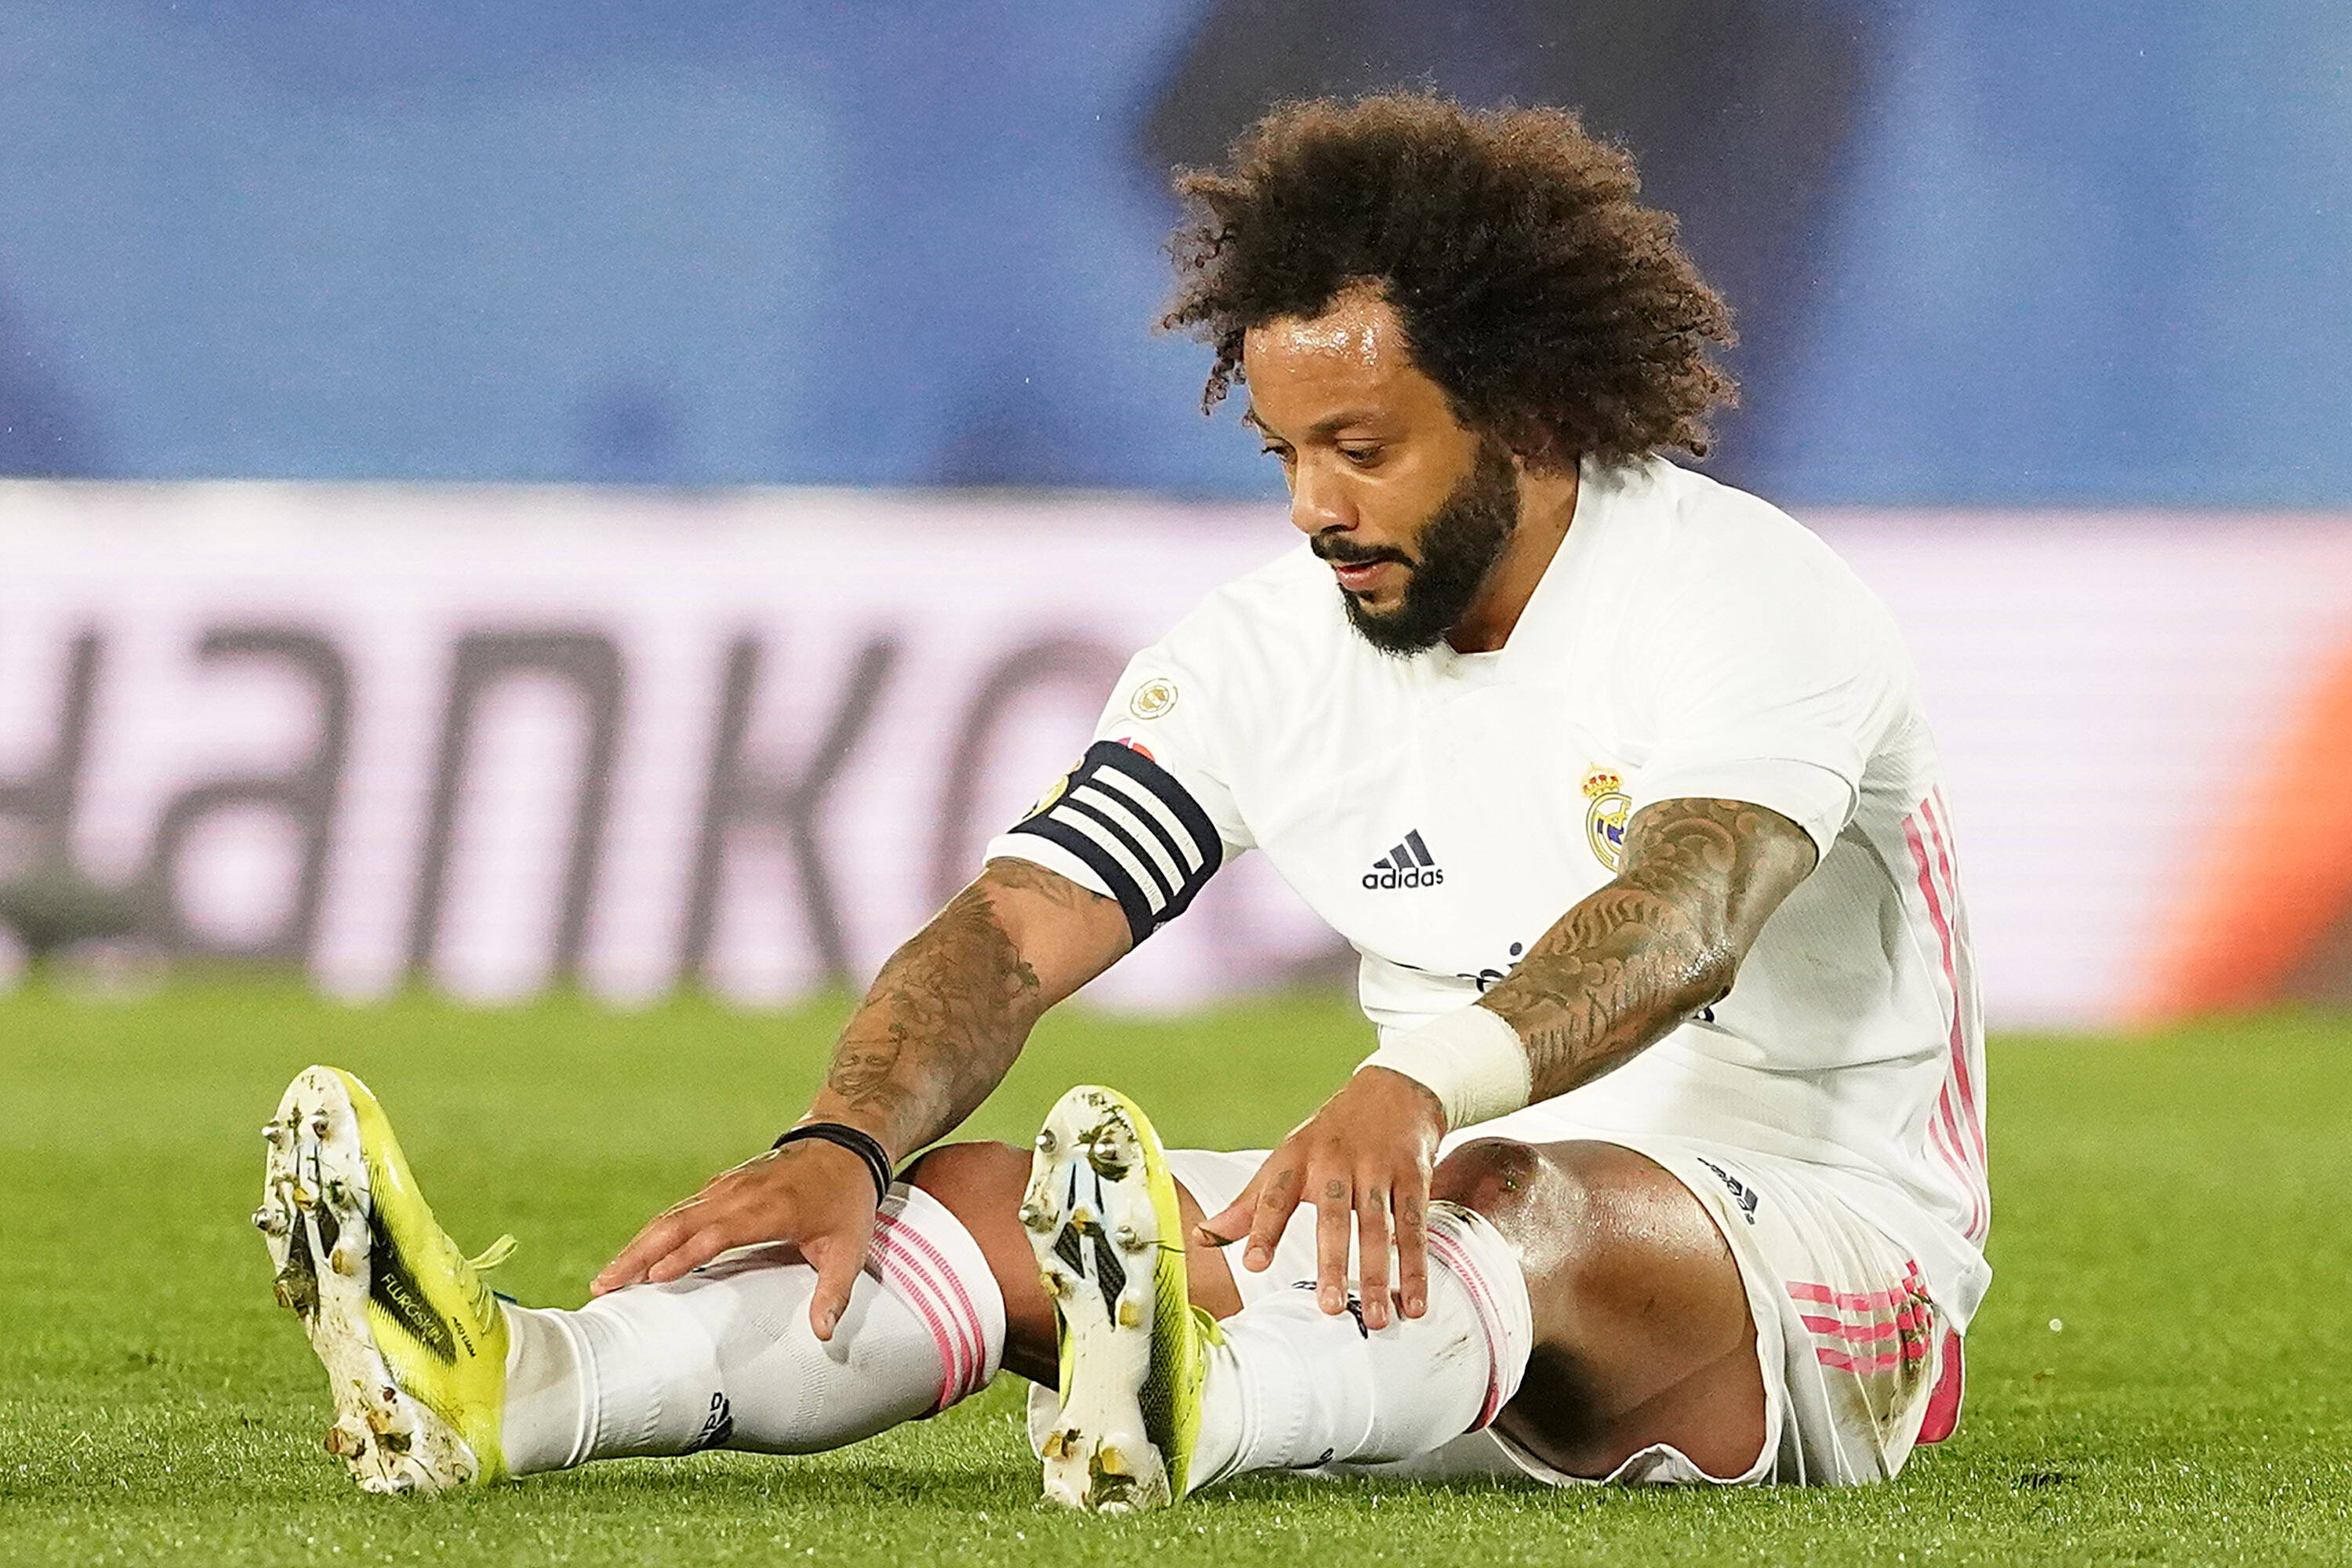 Real Madrid Star Marcelo To Miss Second Leg Vs Chelsea Due To Polling Duty